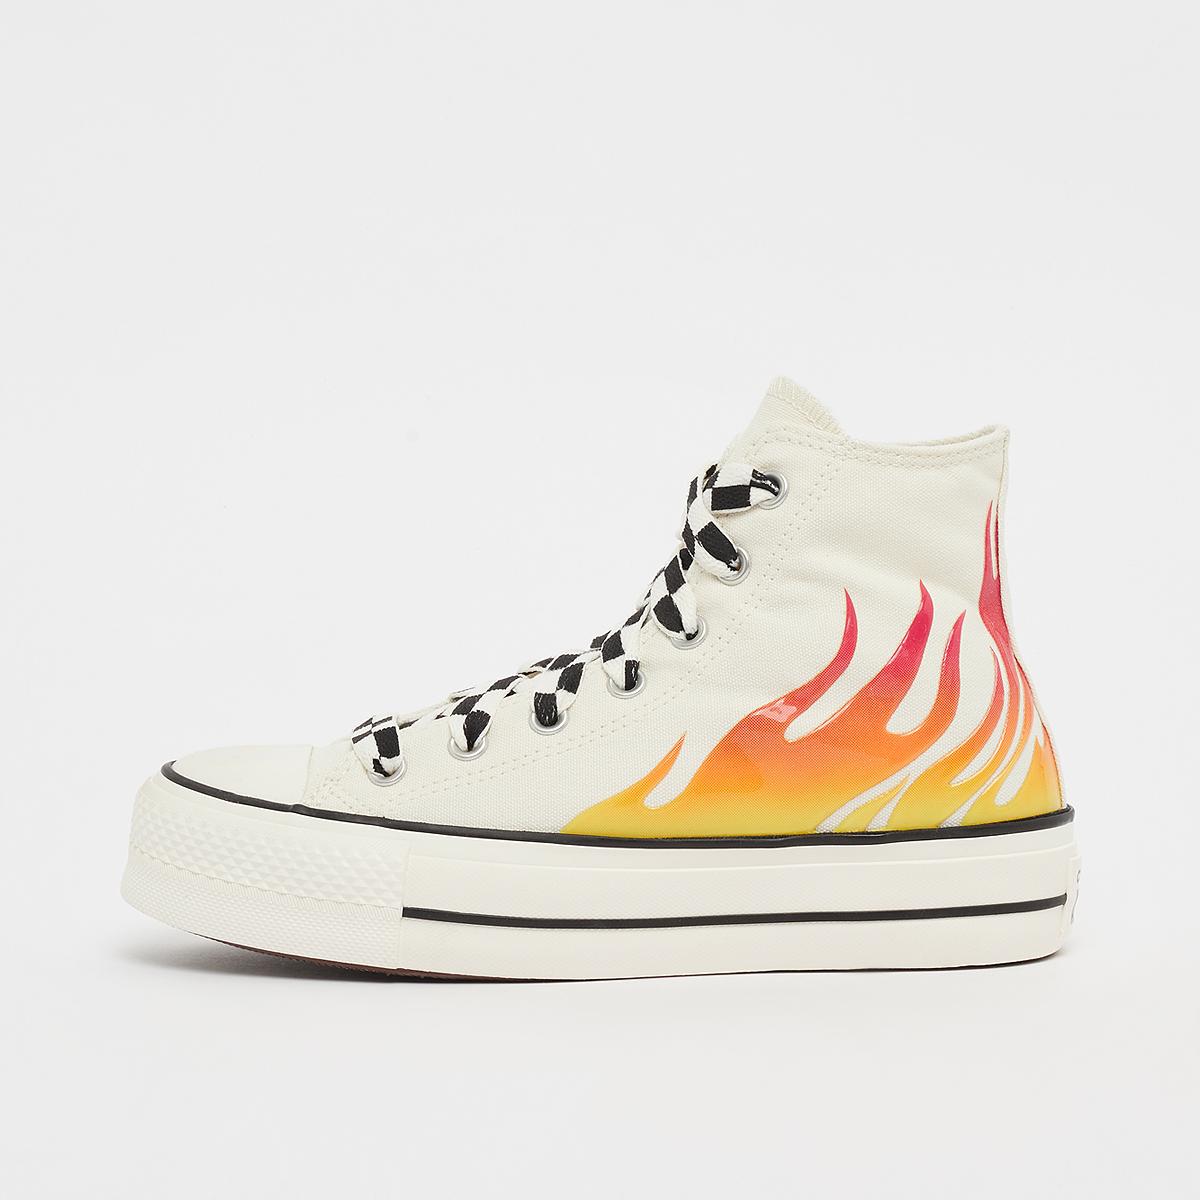 Chuck Taylor All Star, Converse, Footwear, lift egret/enamel red/black, taille: 38